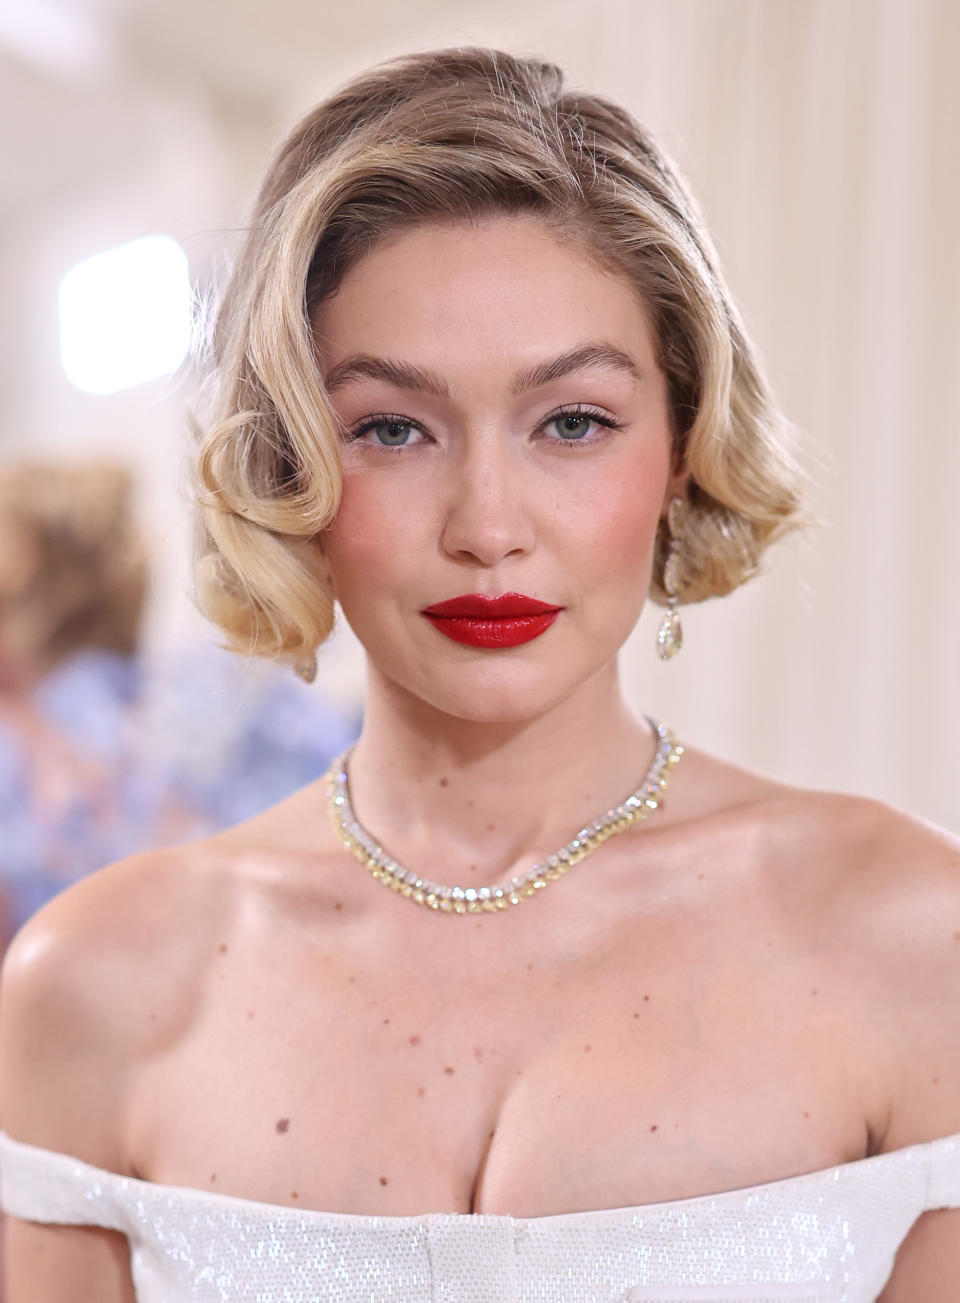 Gigi Hadid is pictured in an off-the-shoulder dress with a sparkling necklace, short wavy hairstyle, and bold red lipstick